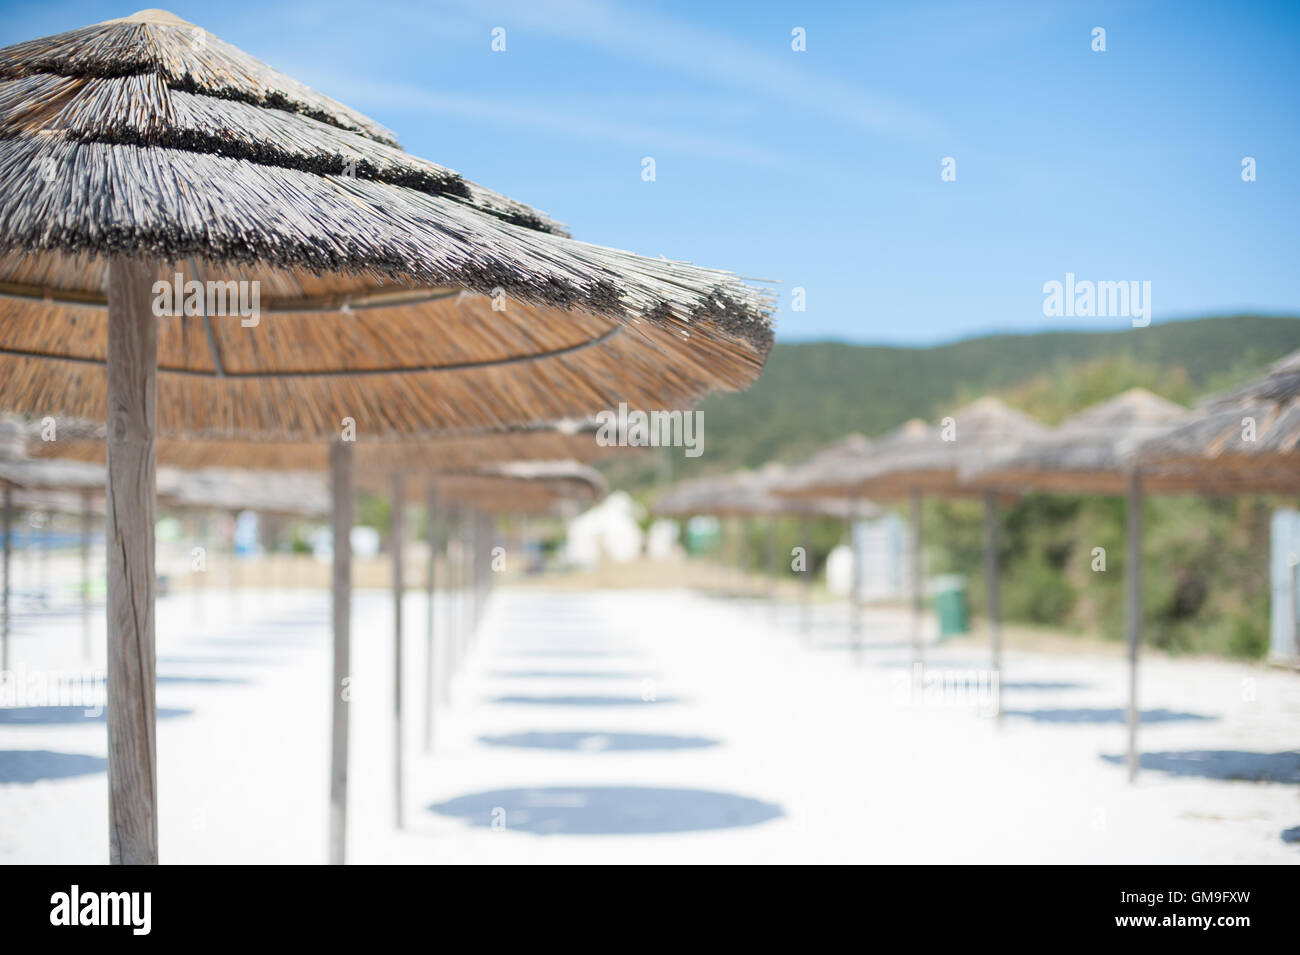 Blurred view of beach umbrella with out of focus white sand and green landscape in background, nobody on the beach in sunny day Stock Photo